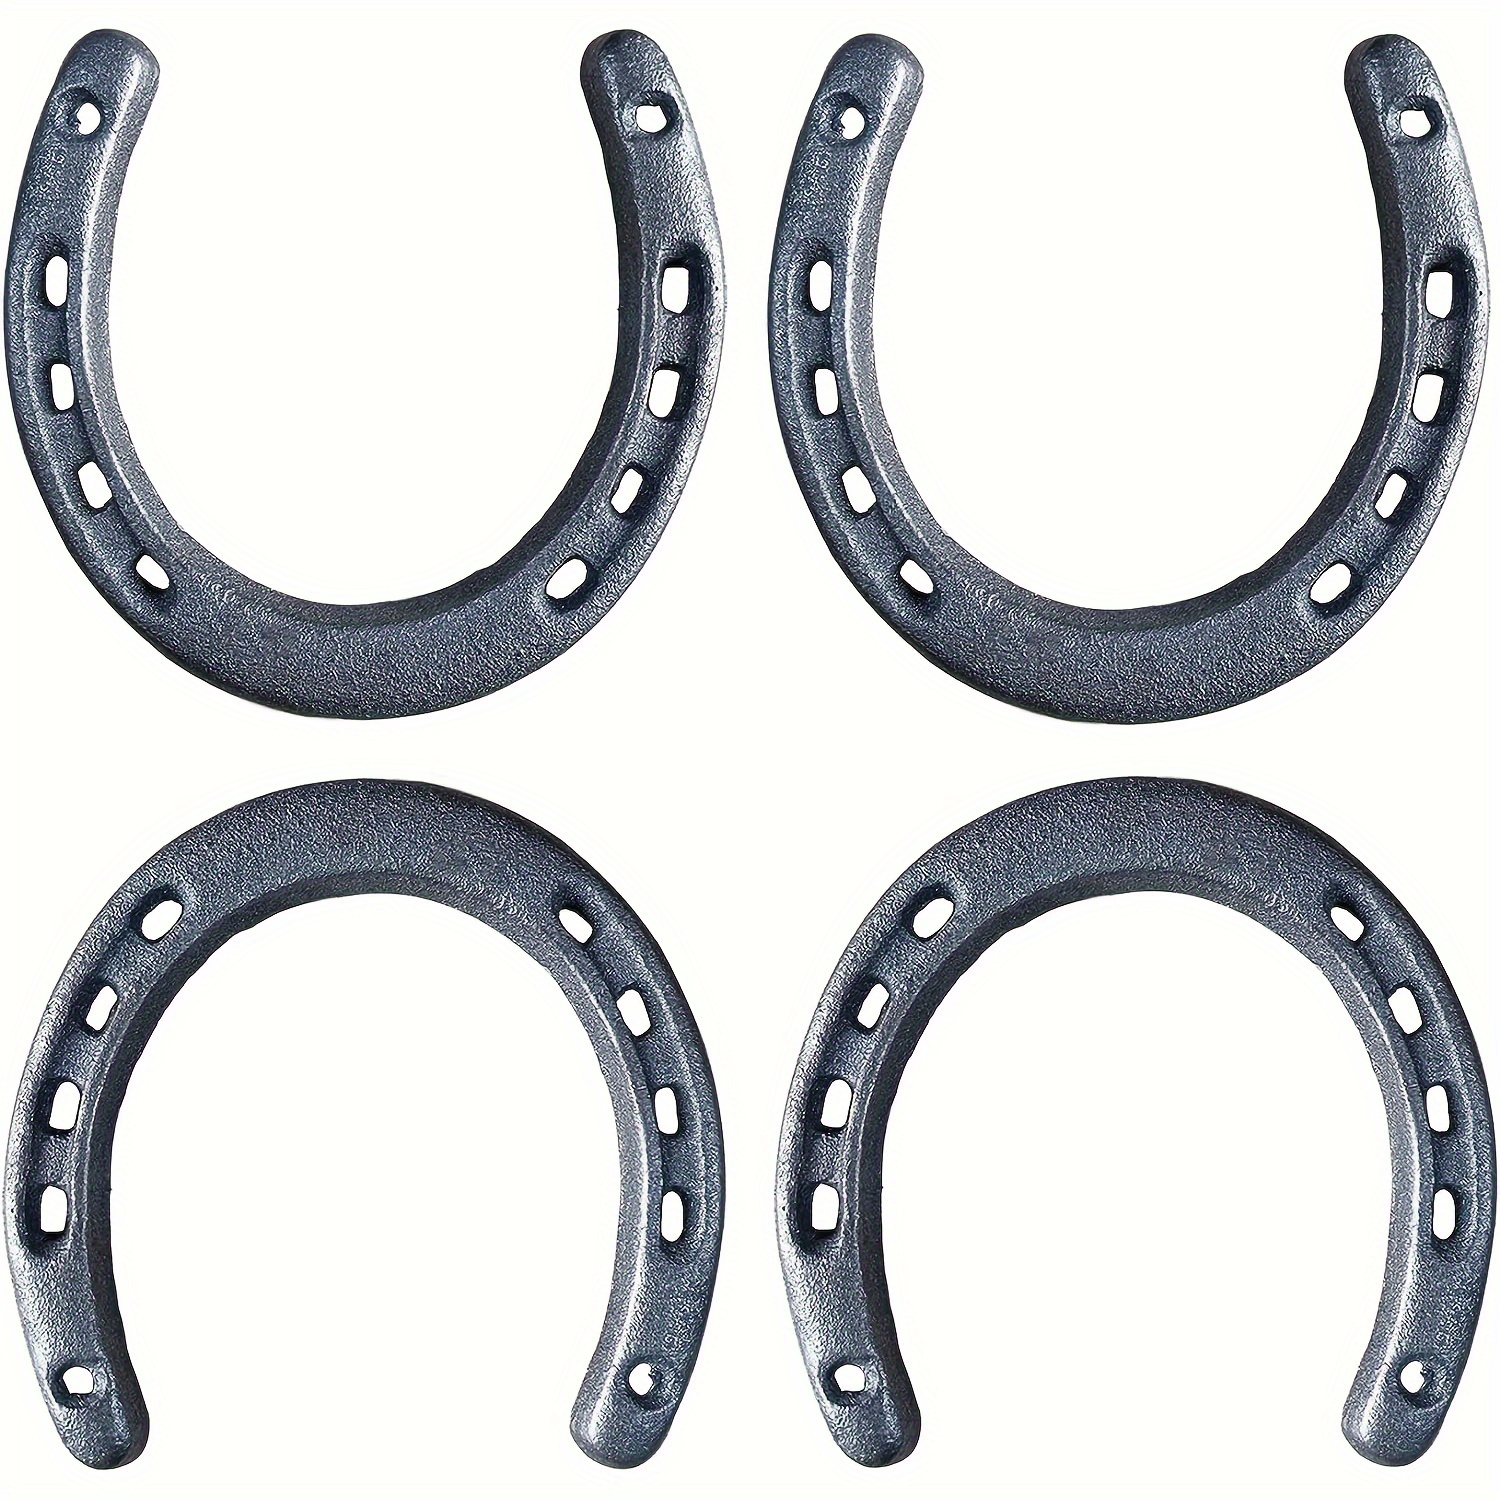 

4pcs Iron Horseshoes For Horses - Cast Lucky Horseshoe Wall Decor For Parties - Durable Horse Shoe Wall Hanging Decoration